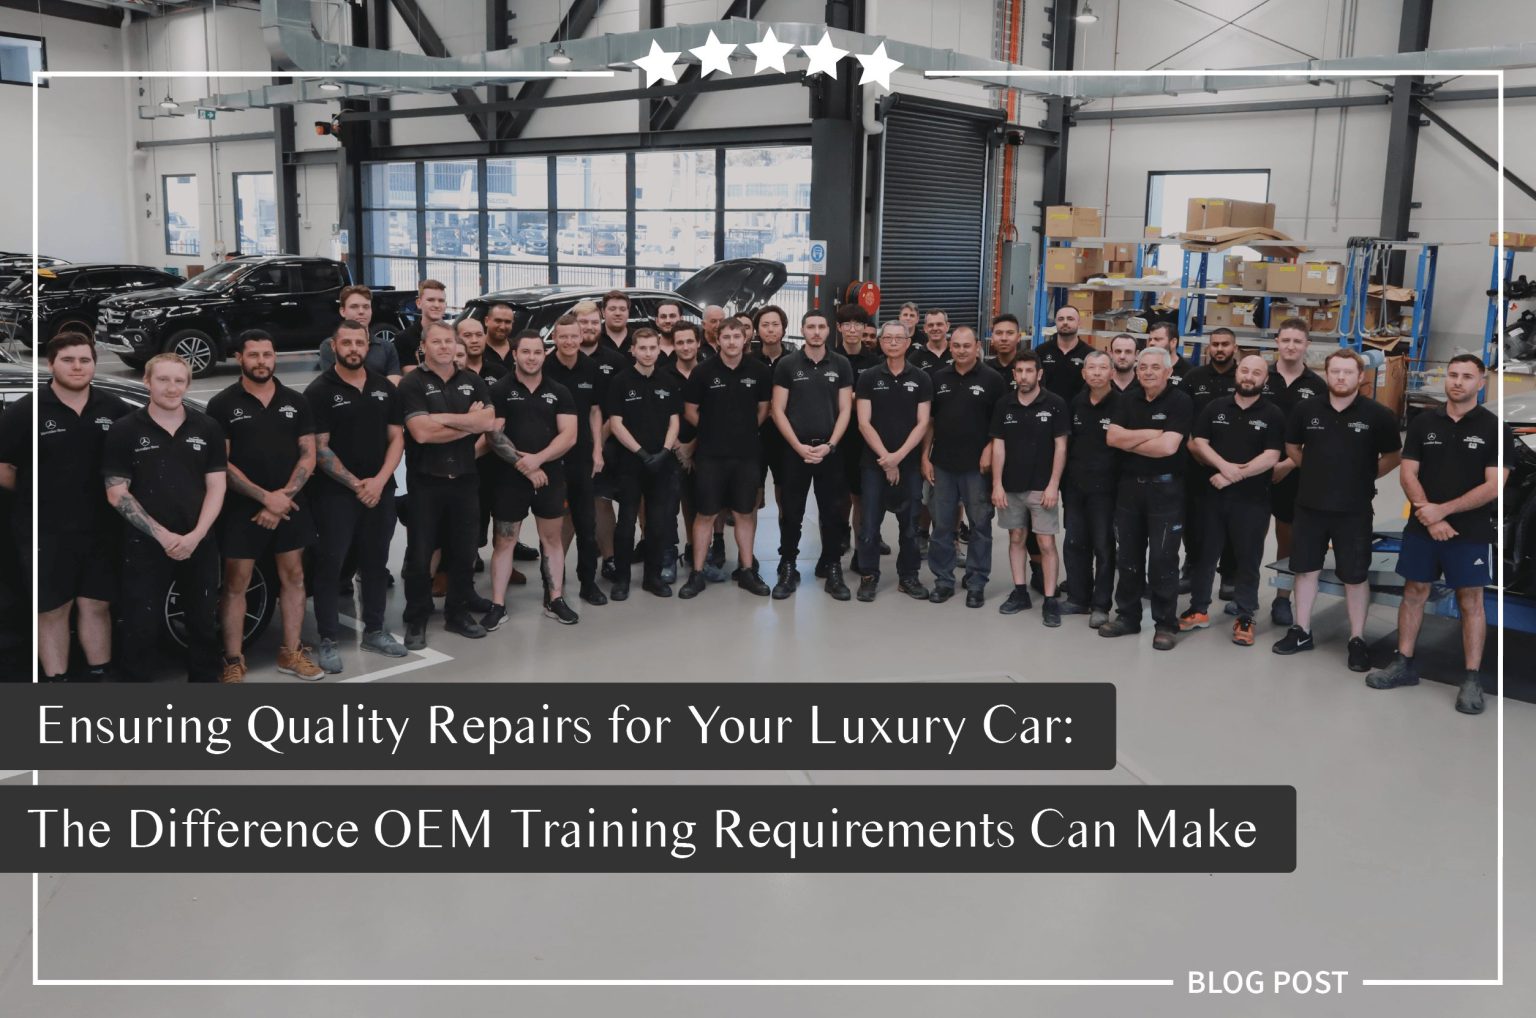 Ensuring Quality Repairs for Your Luxury Car: The Difference OEM Training Requirements Can Make